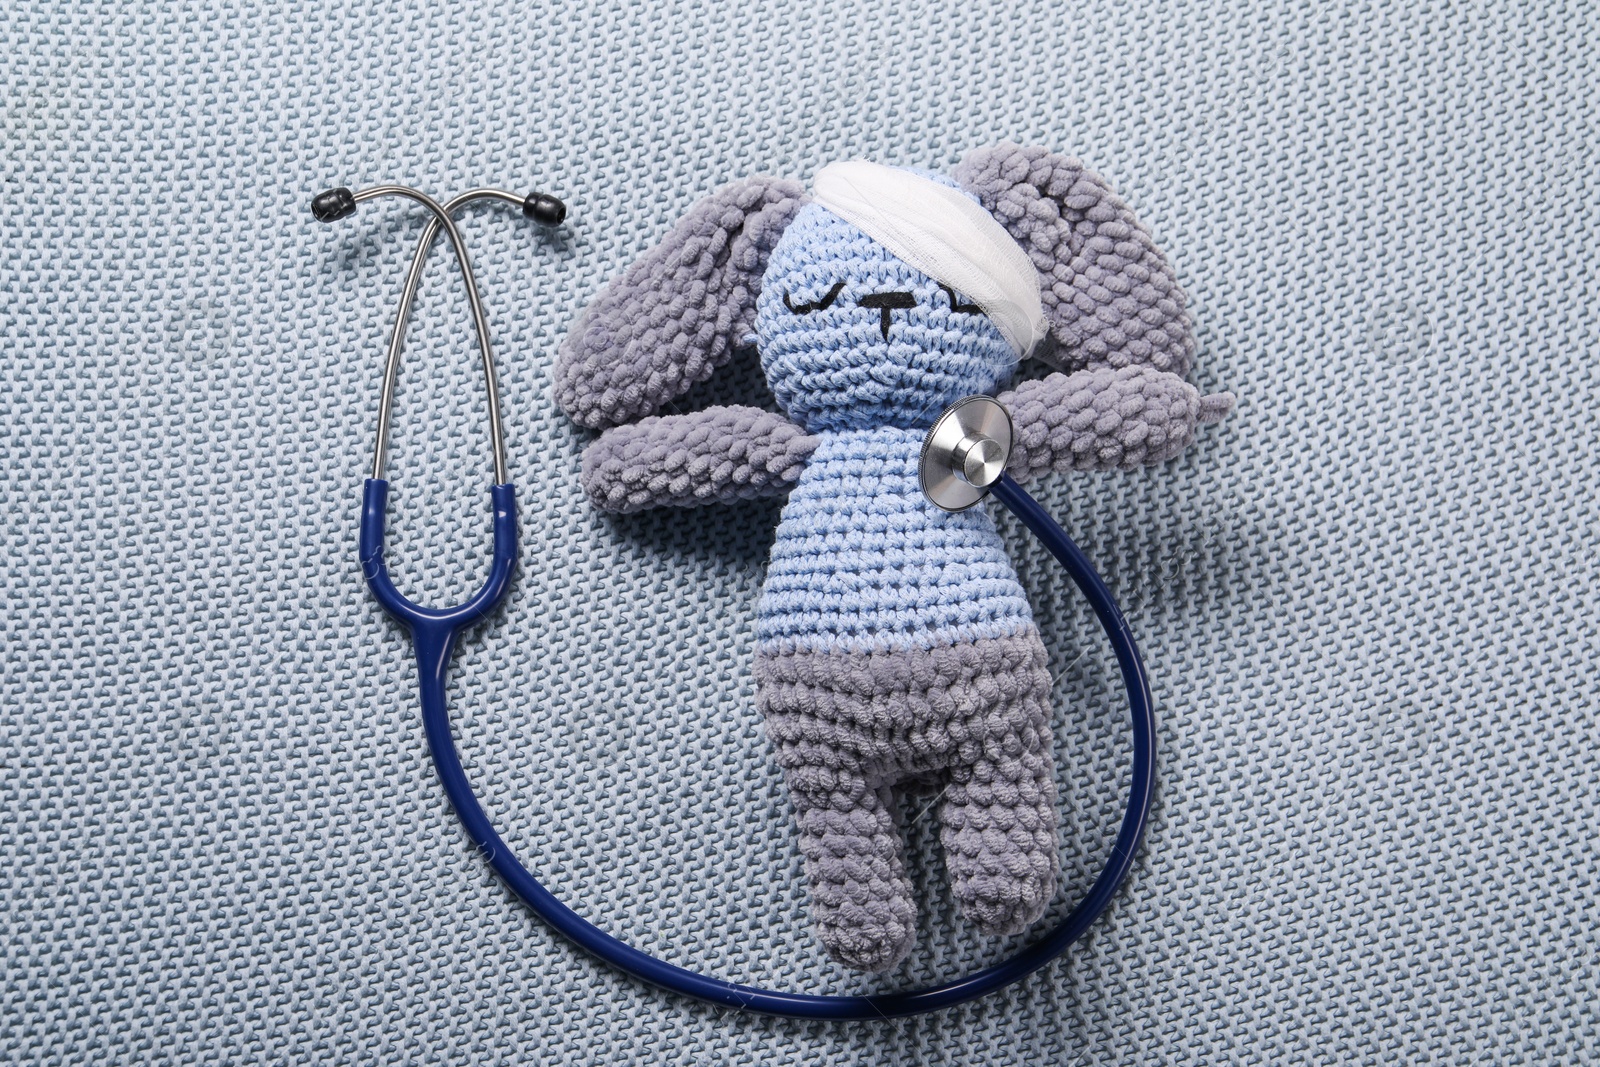 Photo of Toy bunny and stethoscope on gray blanket, top view